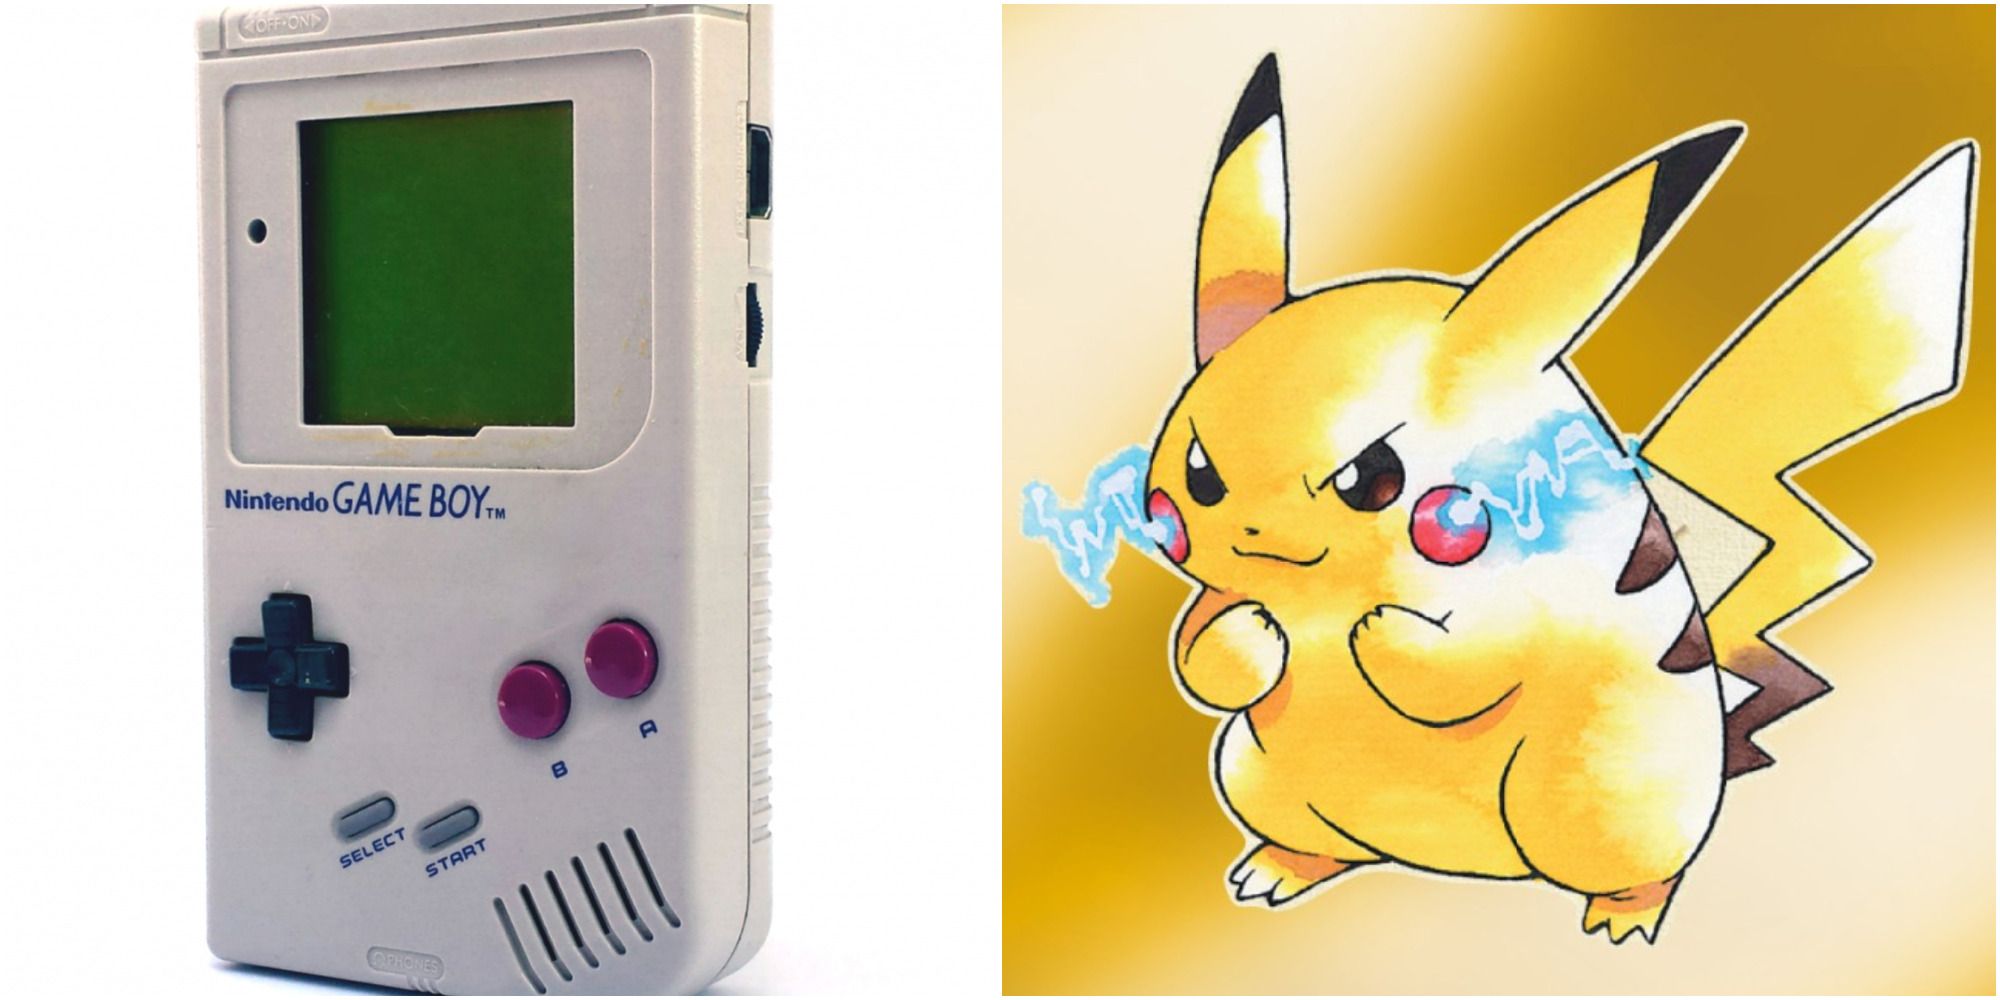 Original Game Boy and Pikachu from Pokemon Yellow Version cover art